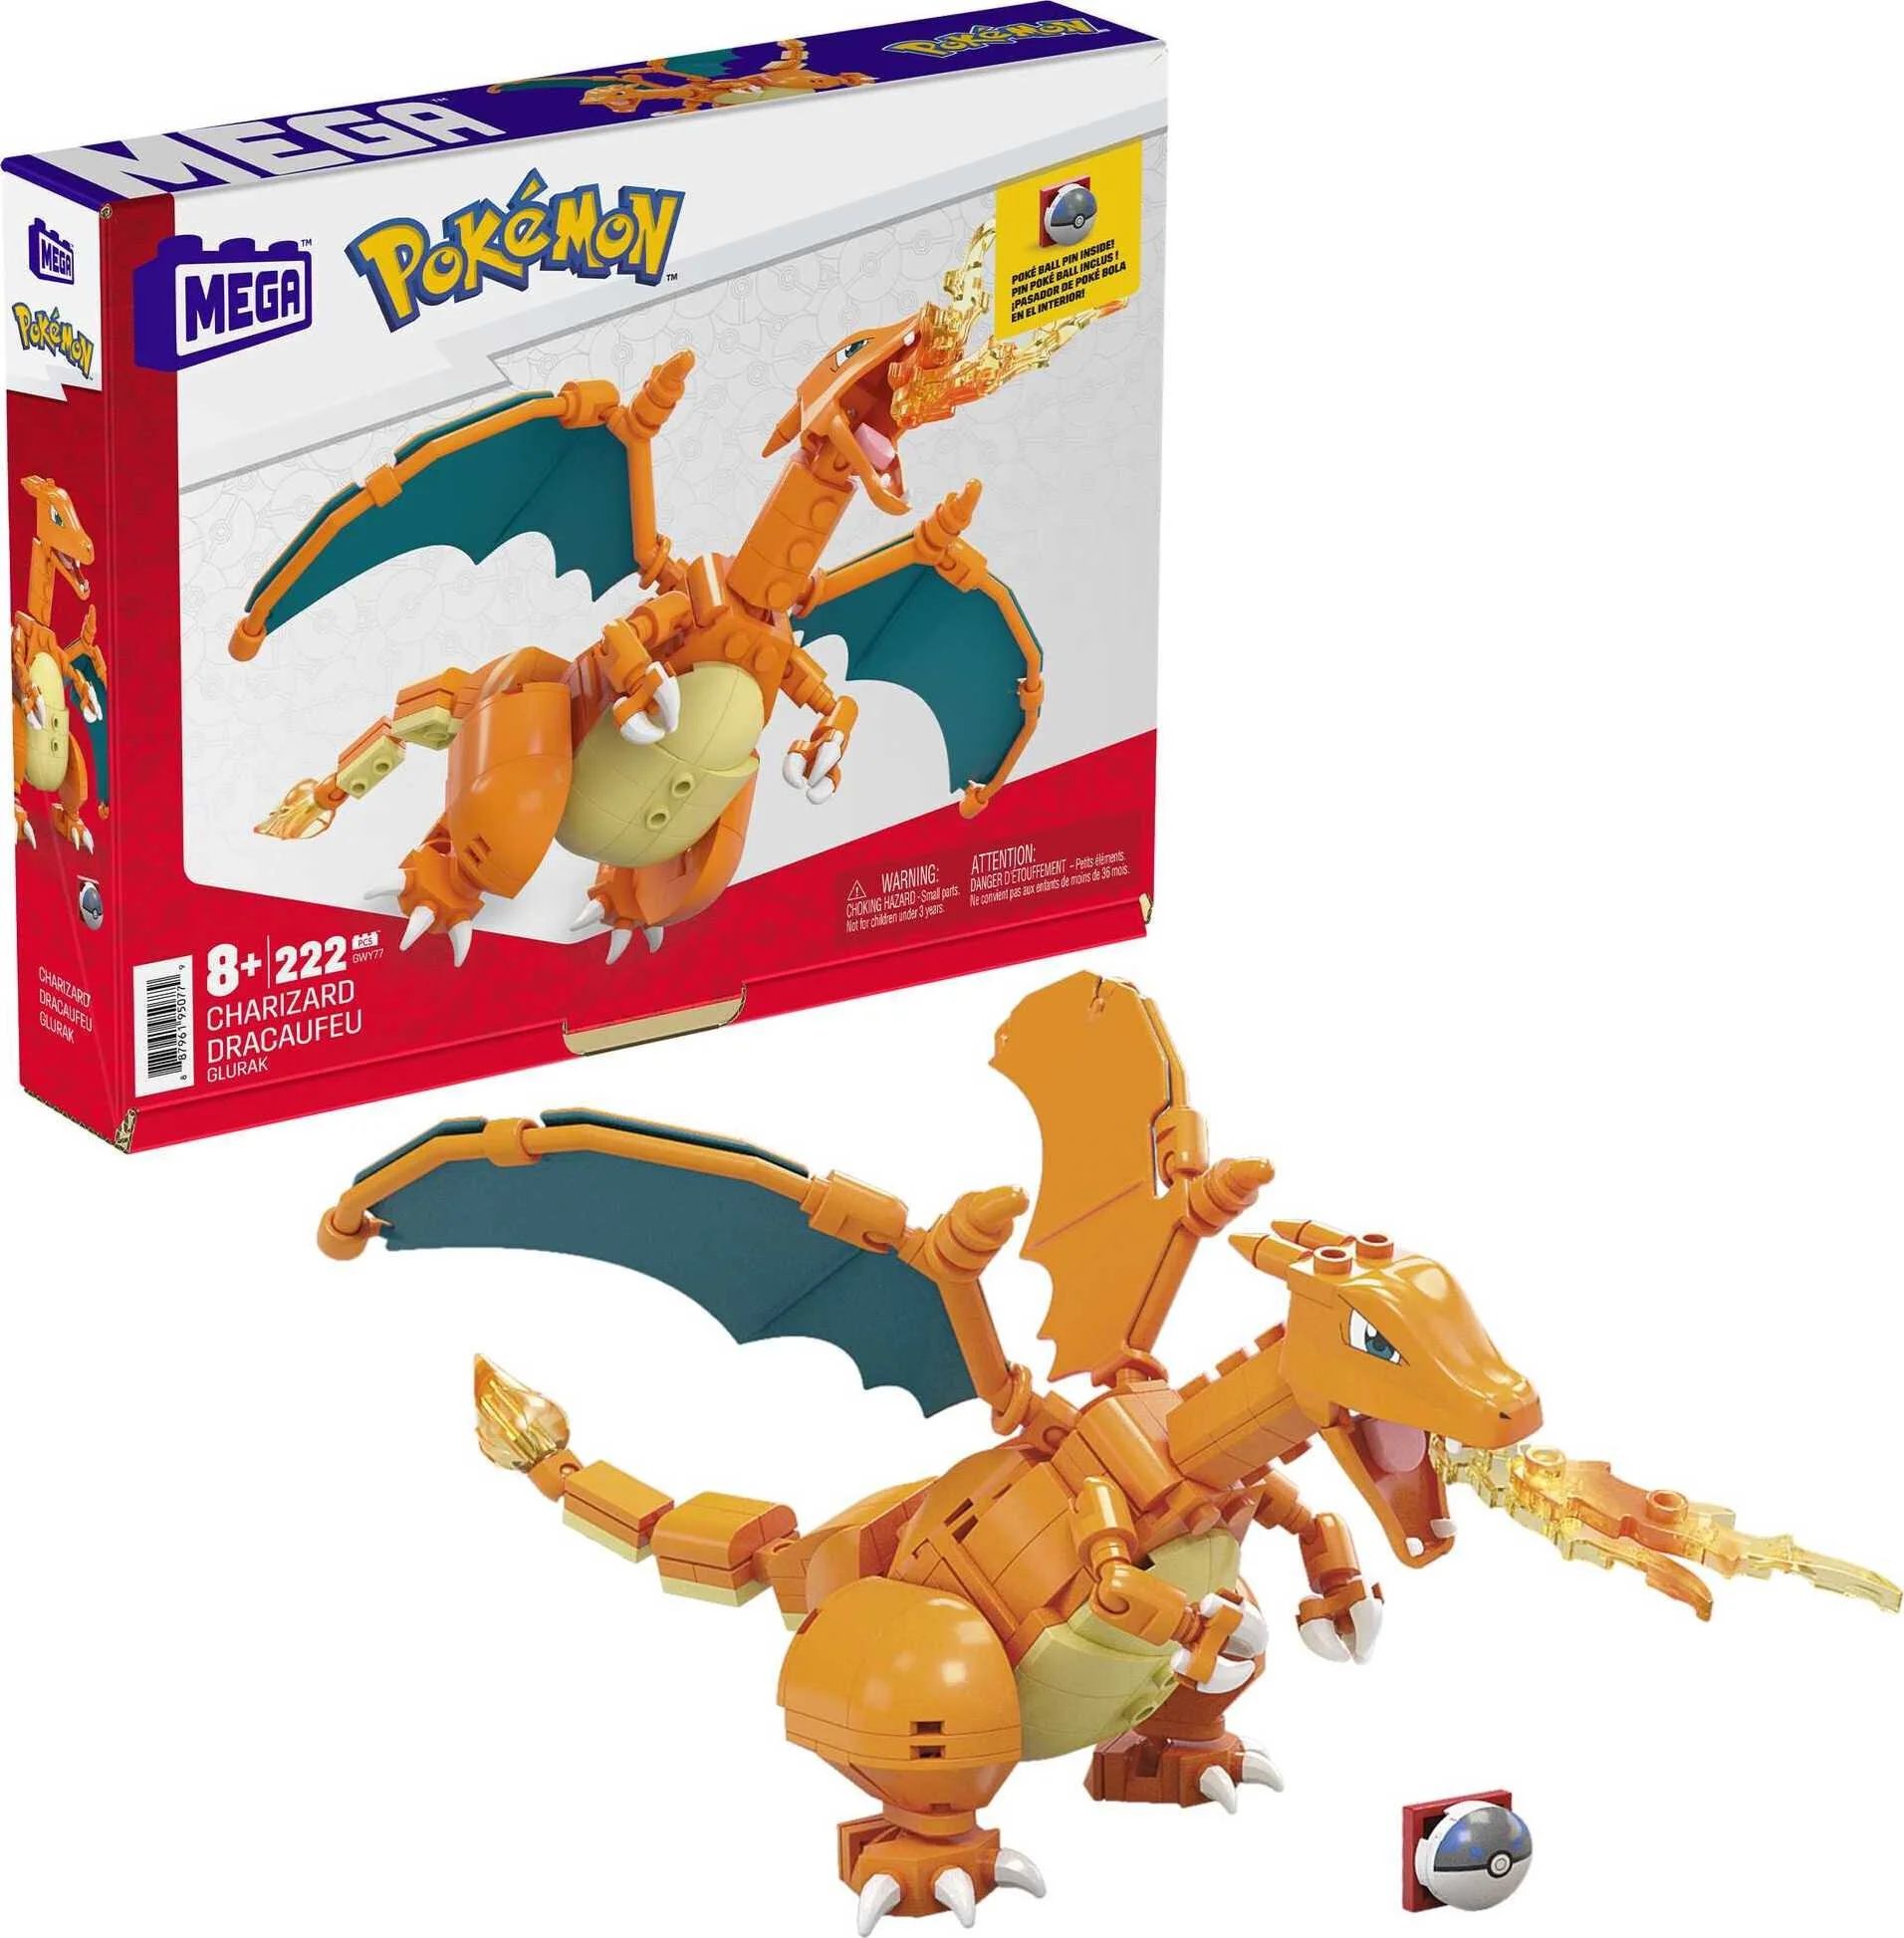 MEGA Pokemon Building Toy Kit Charizard (222 Pieces) with 1 Action Figure for Kids | Walmart (US)